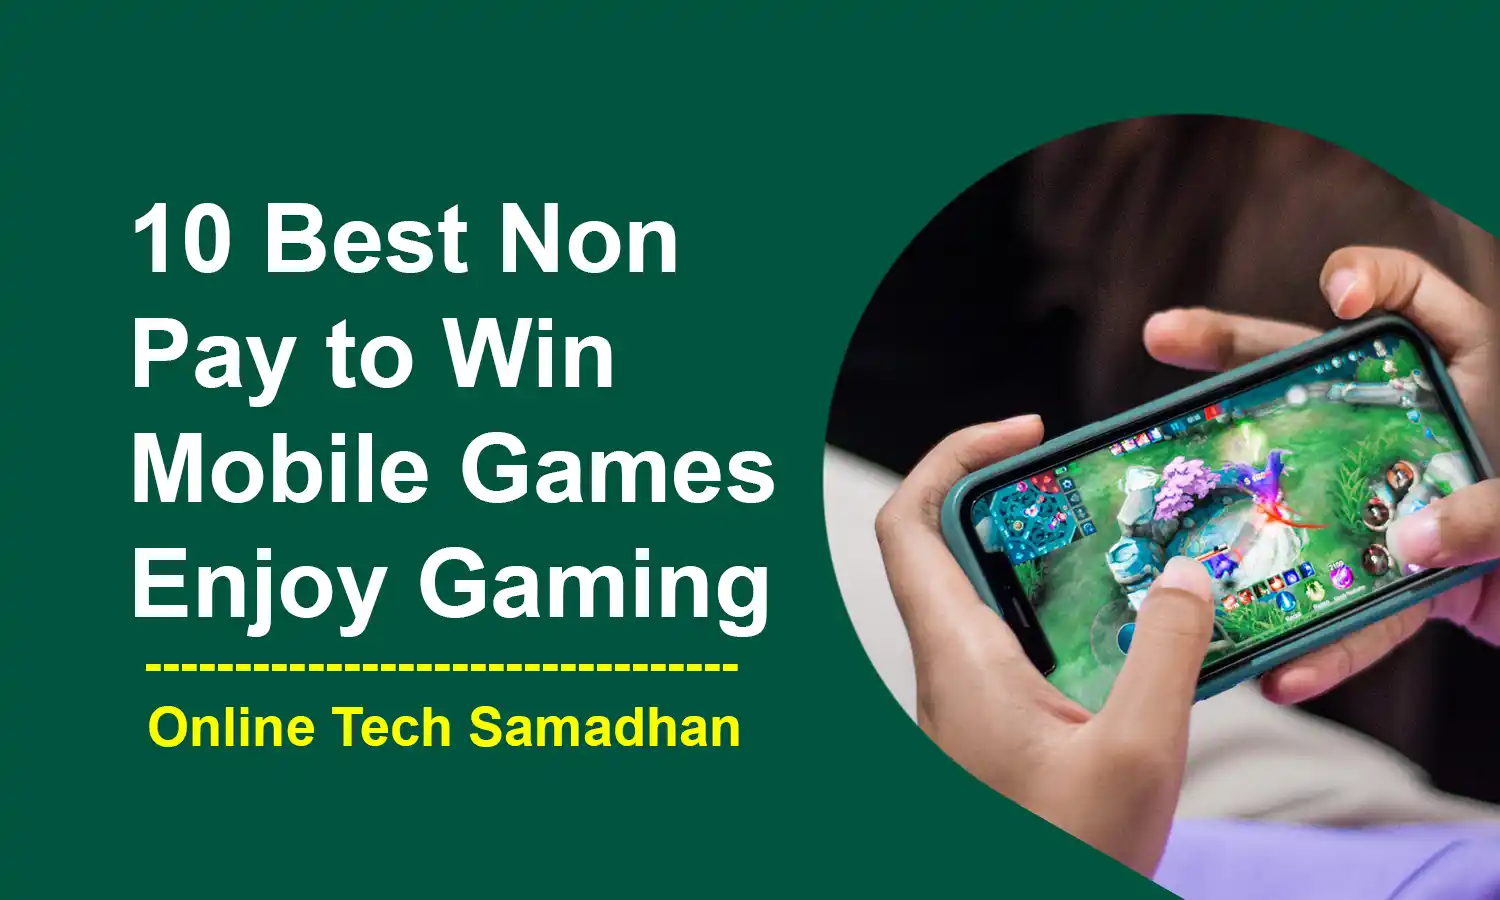 10 Best Non Pay to Win Mobile Games